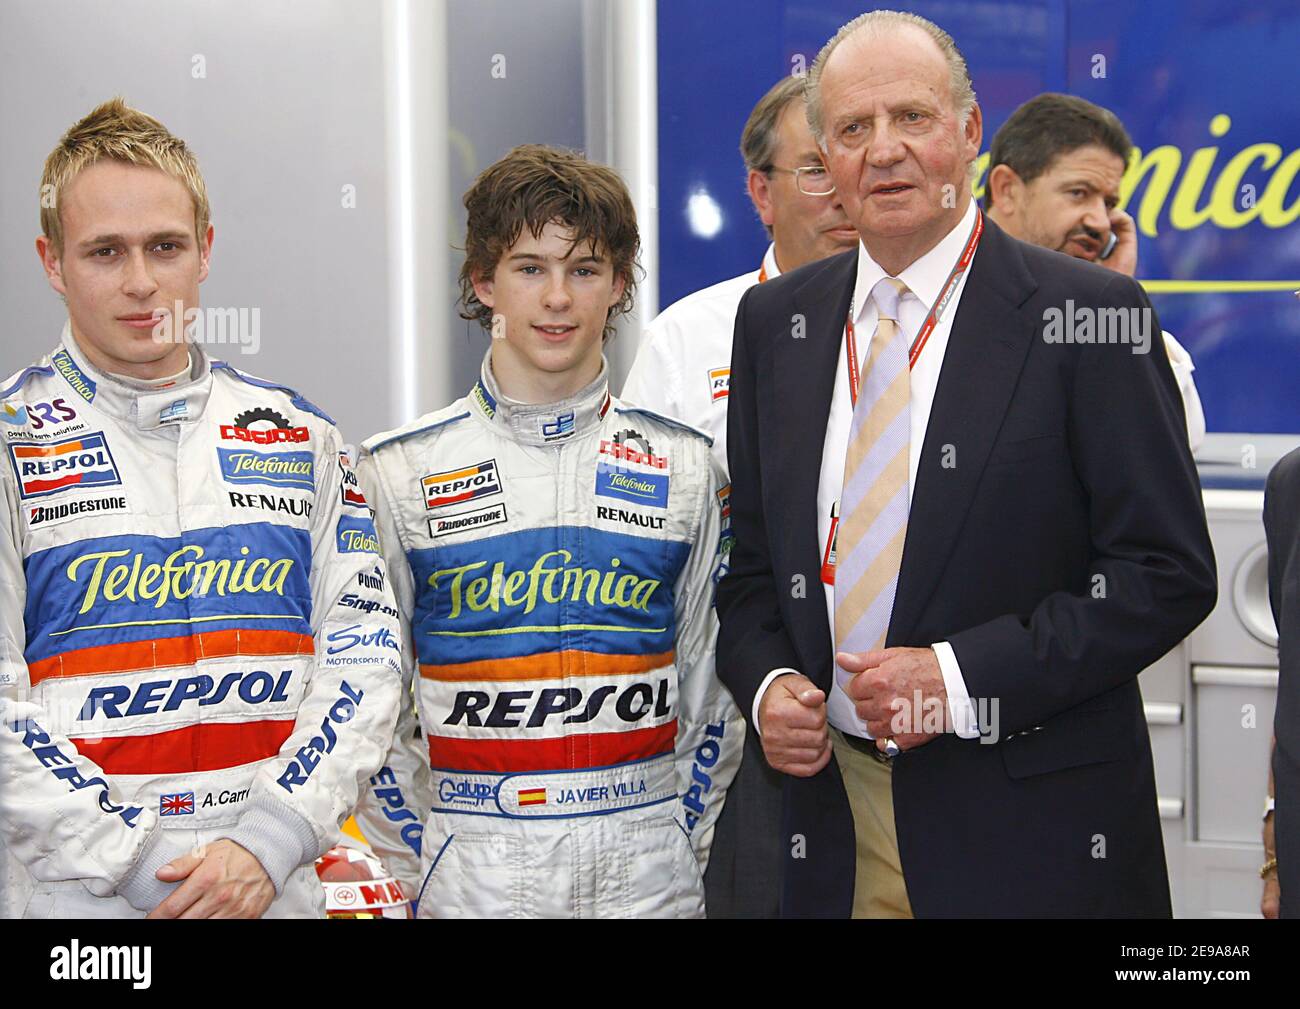 King Juan Carlos of Spain poses with Spanish GP2 team drivers Adam Carroll and Javier Sola during his visit to the Spanish Formula 1 Grand Prix held on the Catalunya track near Barcelona, Spain on May 14, 2006. Photo by Patrick Bernard/ABACAPRESS.COM Stock Photo